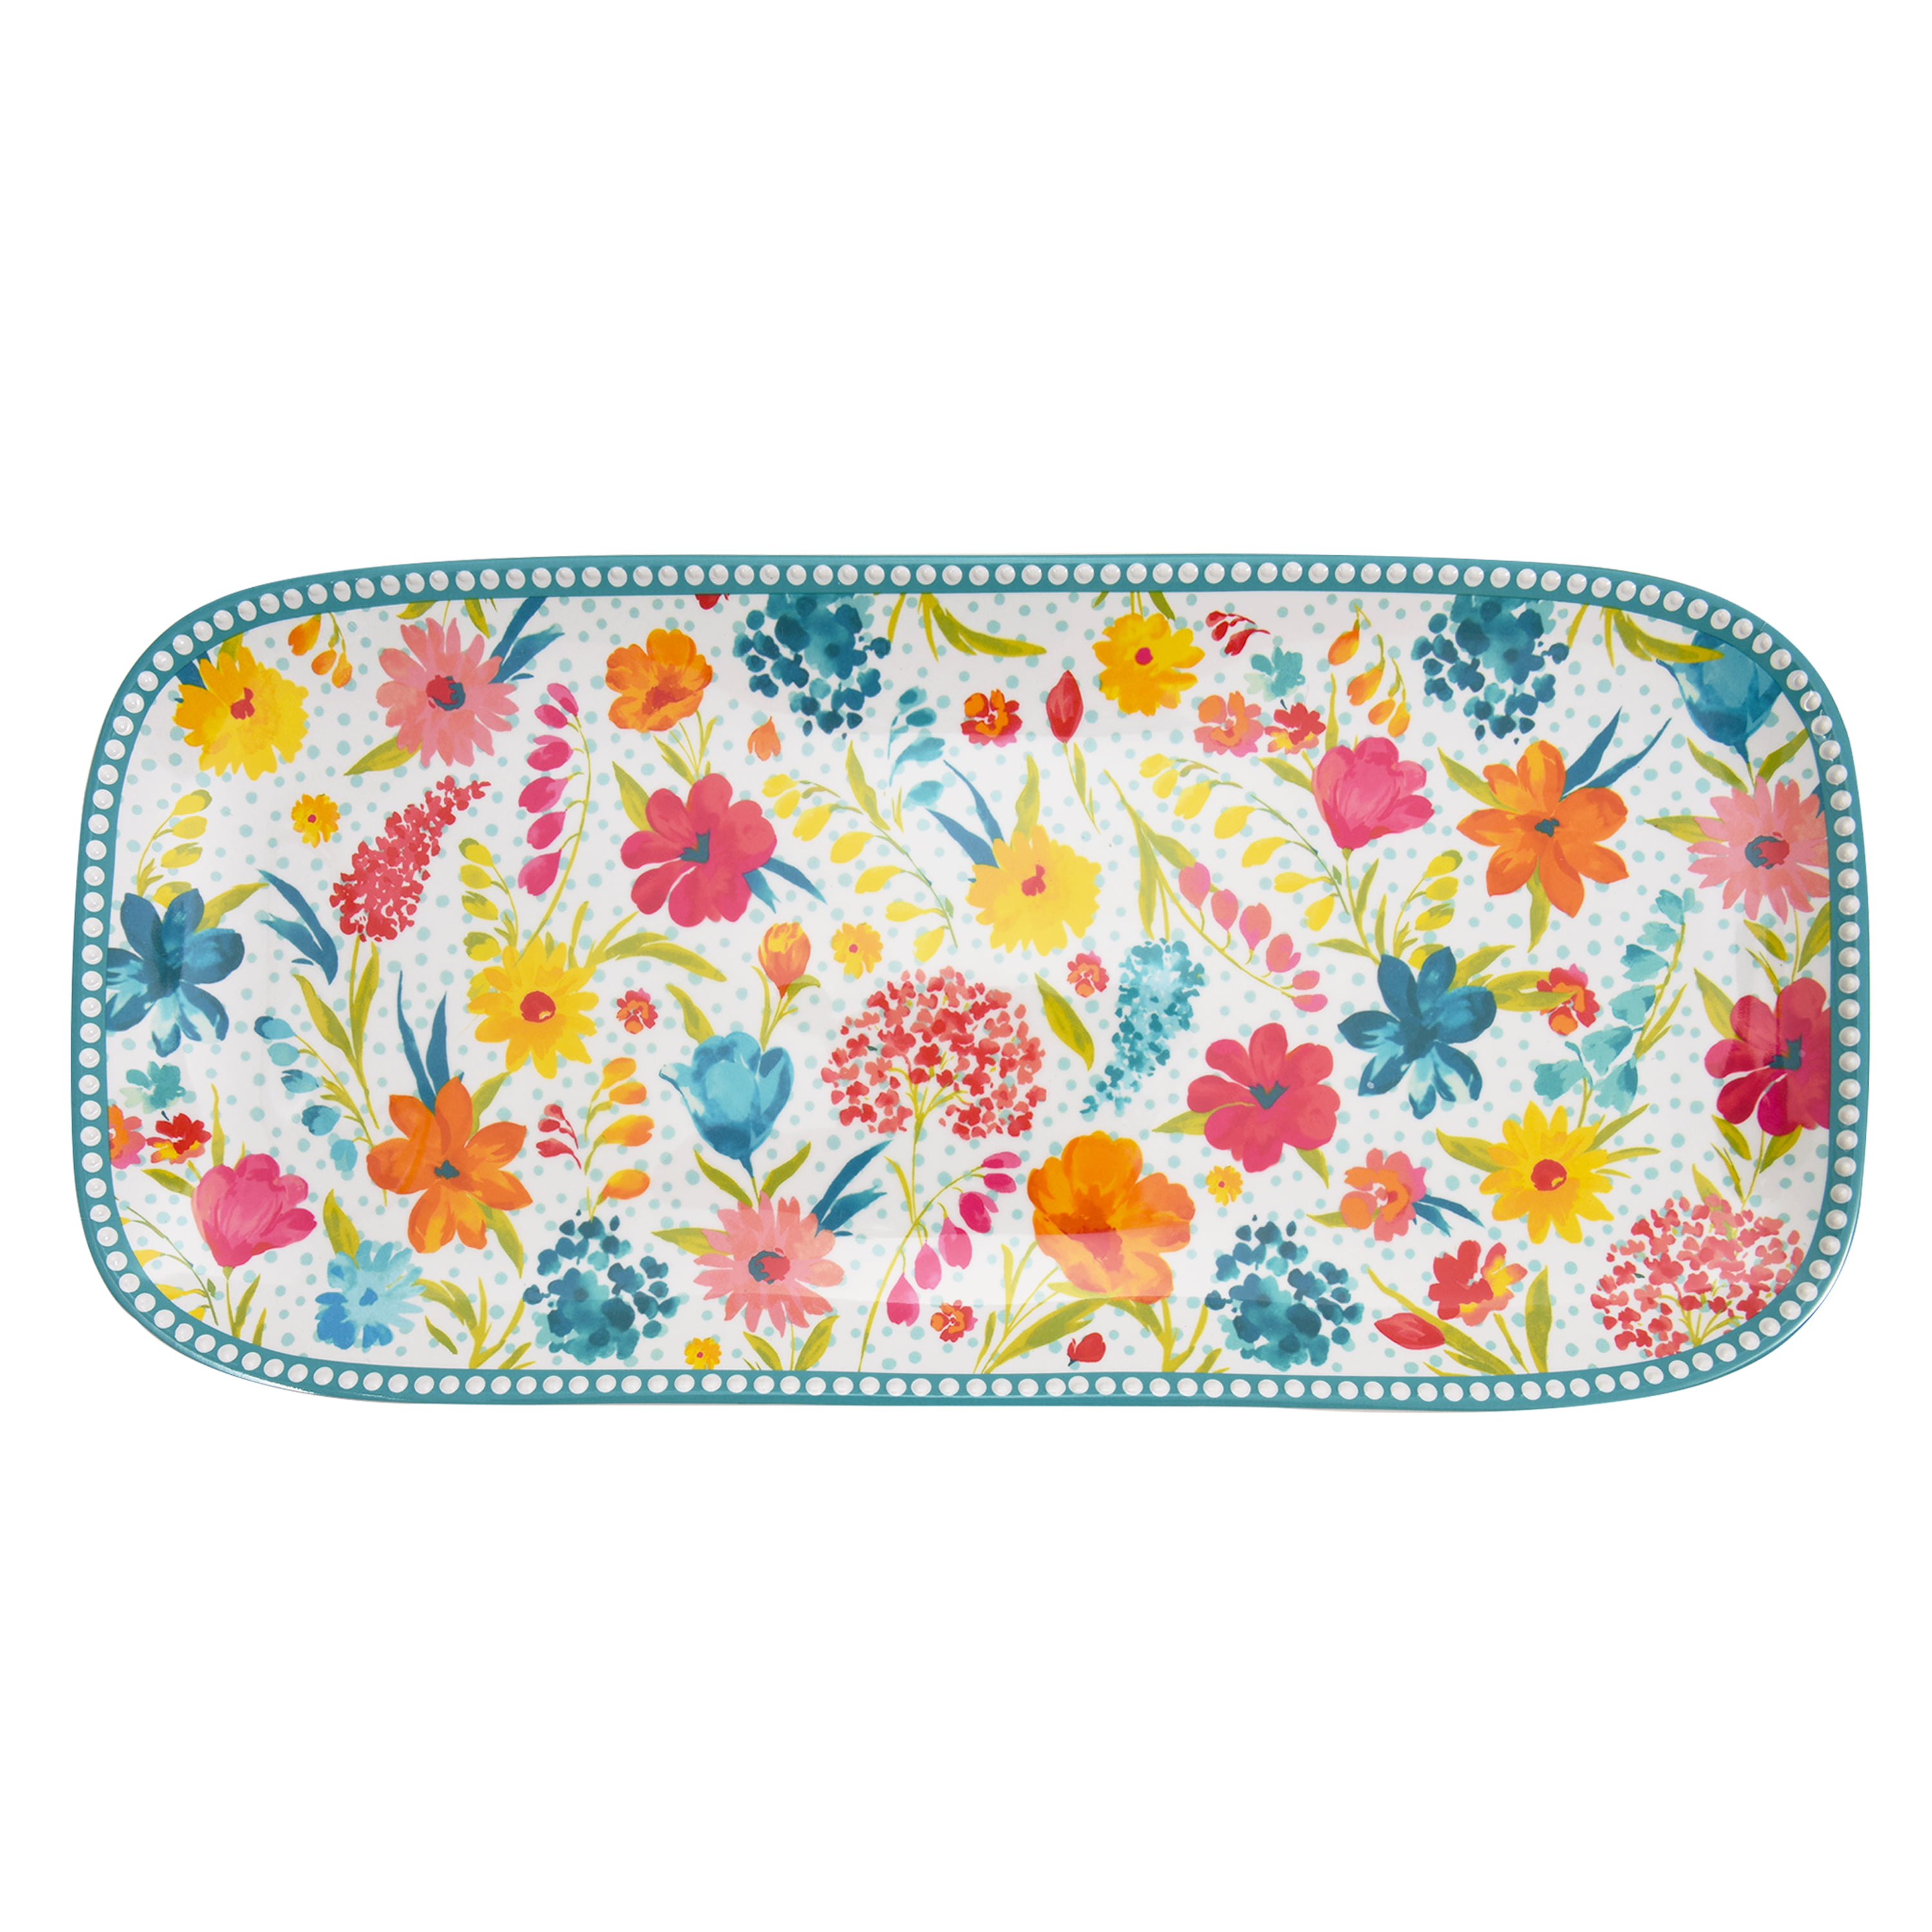 The Pioneer Woman Serving Tray Melamine Sunny Days Spring 2020 CORAL